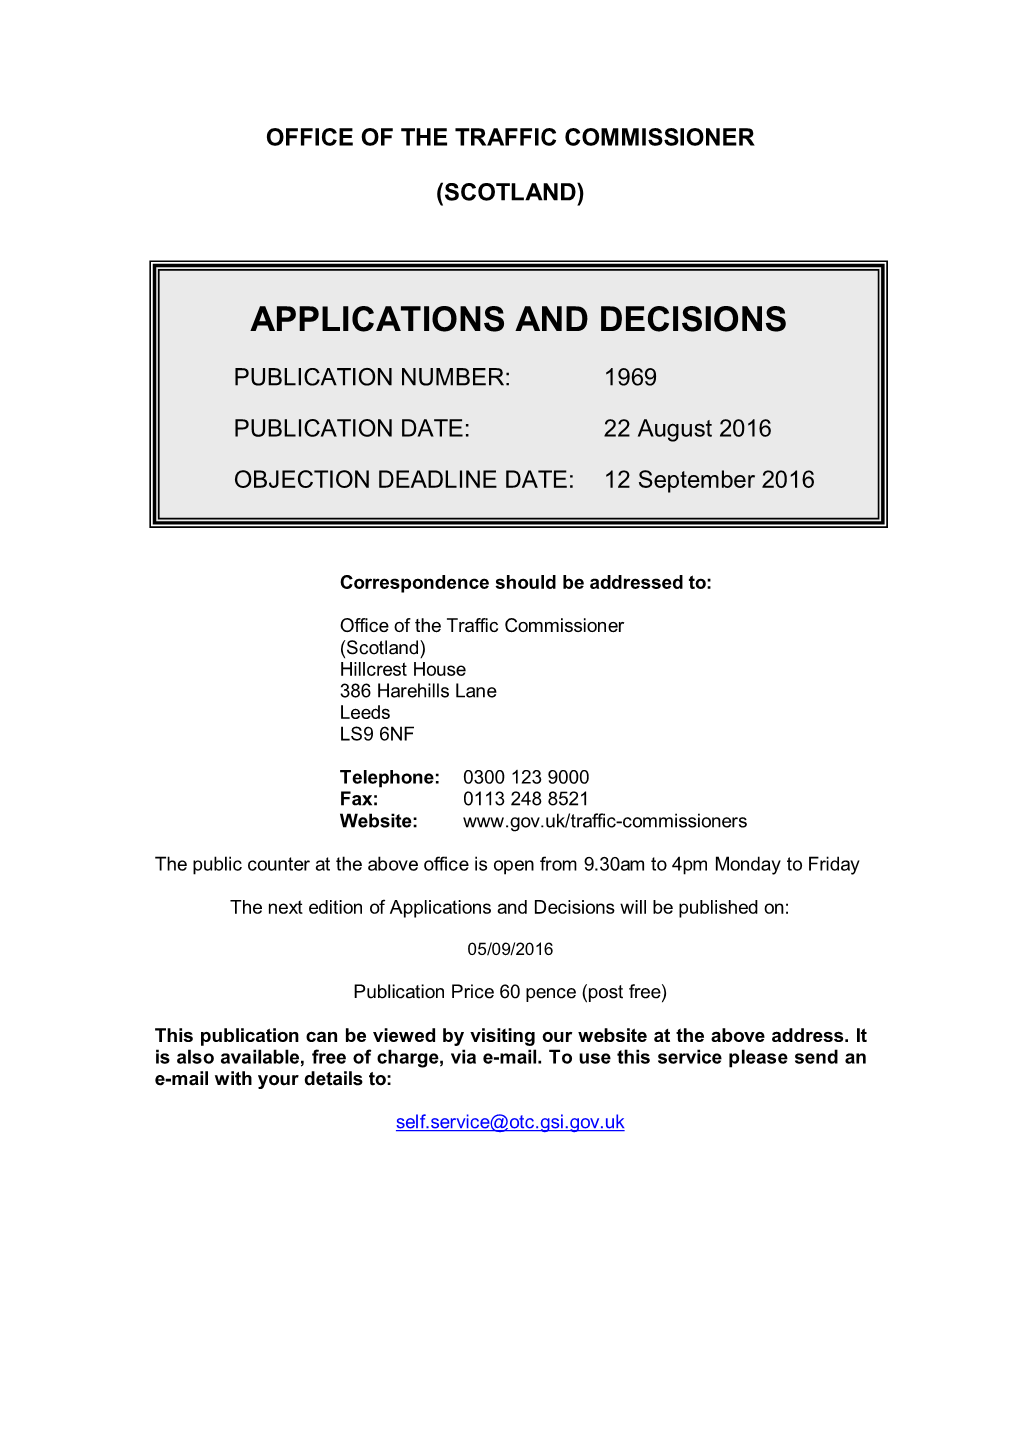 Applications and Decisions: Scotland: 22 August 2016